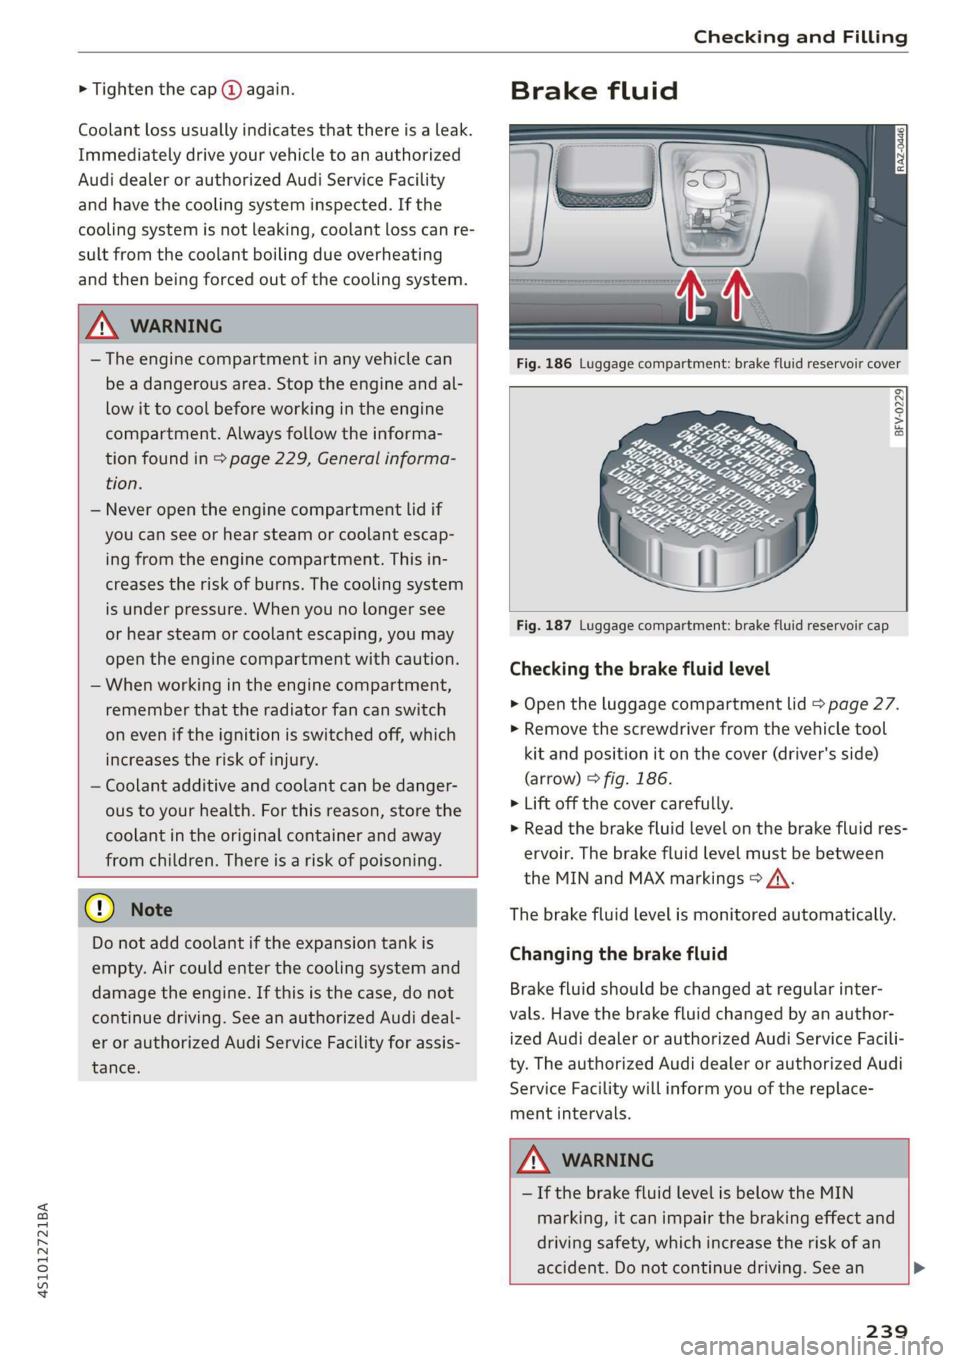 AUDI R8 COUPE 2020  Owners Manual 4S1012721BA 
Checking and Filling 
  
> Tighten the cap @ again. 
Coolant loss usually indicates that there is a leak. 
Immediately drive your vehicle to an authorized 
Audi dealer or authorized Audi 